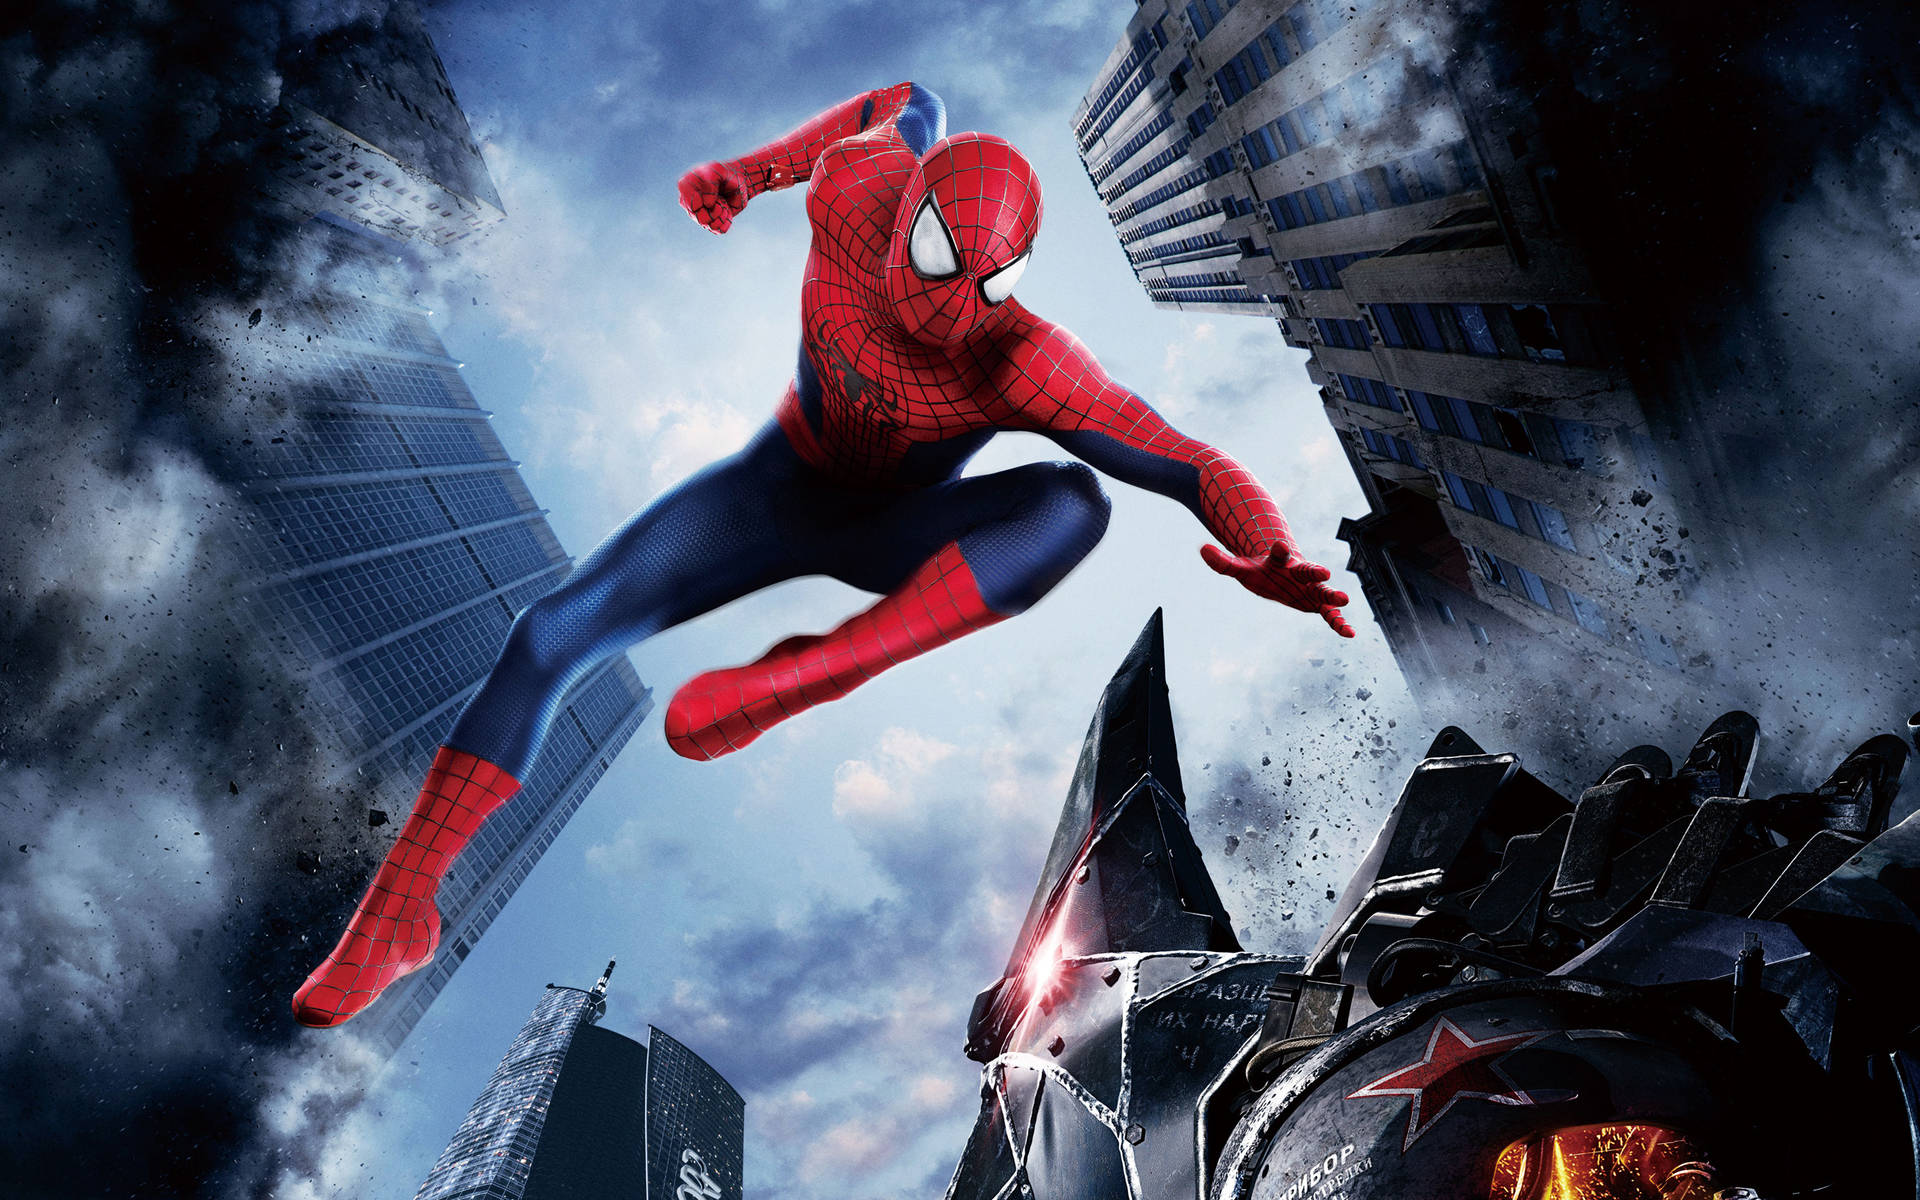 “Climbing to New Heights as The Amazing Spider Man!” Wallpaper